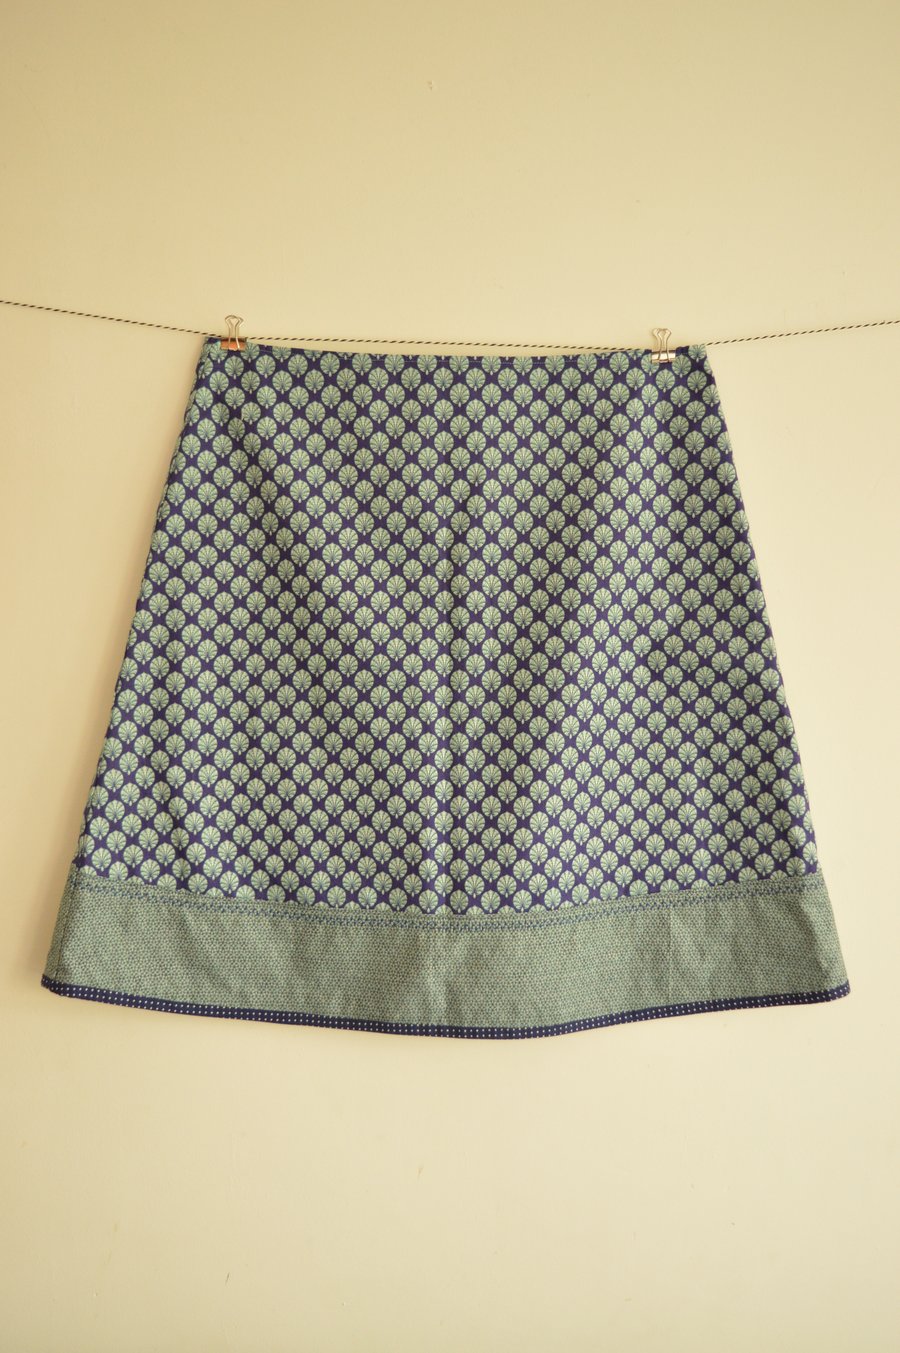 SALE   A line cotton skirt in deep purple and teal size 12